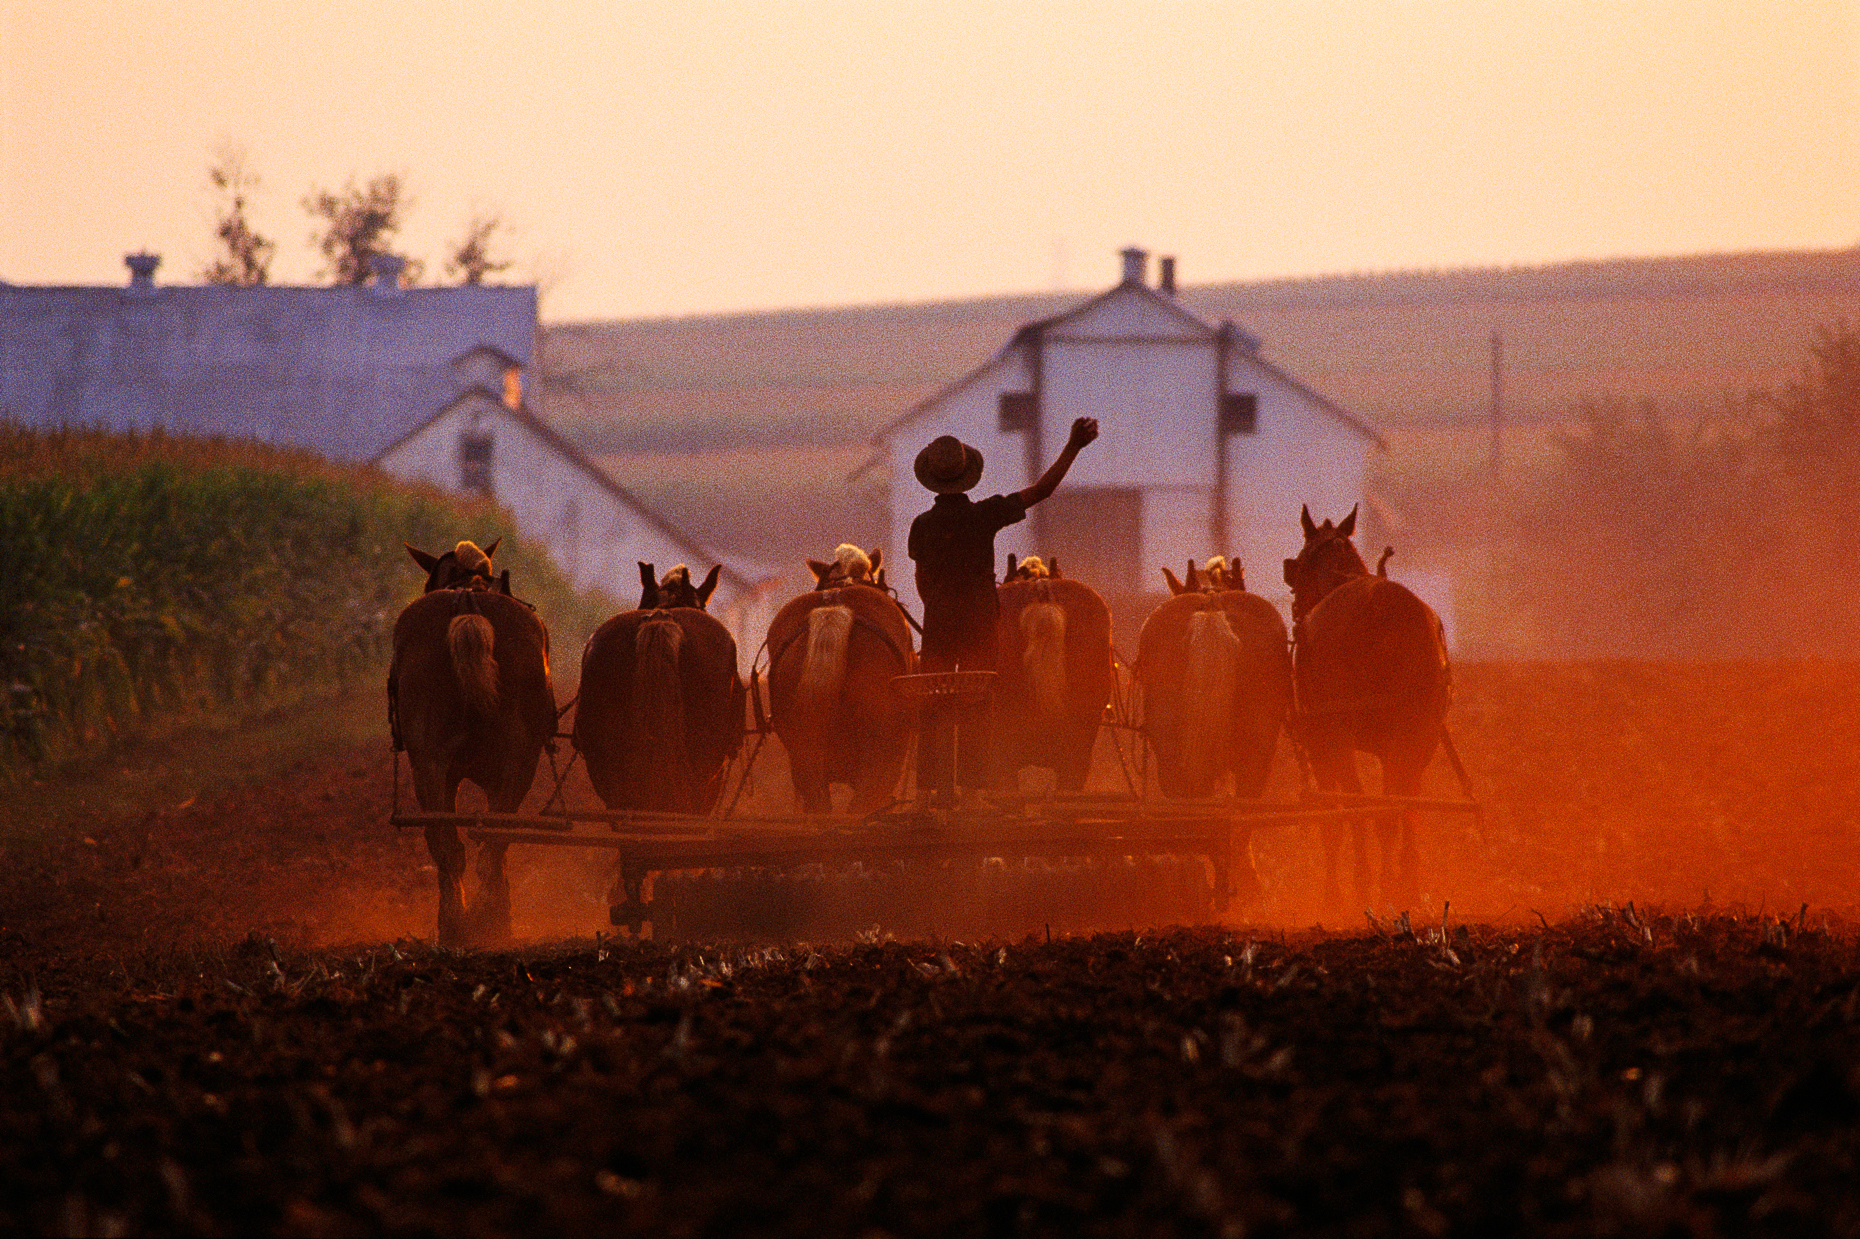 Amish farmer at sunset plowing his farm fields with a horse drawn plow, Lancaster County, home to the Plain People.